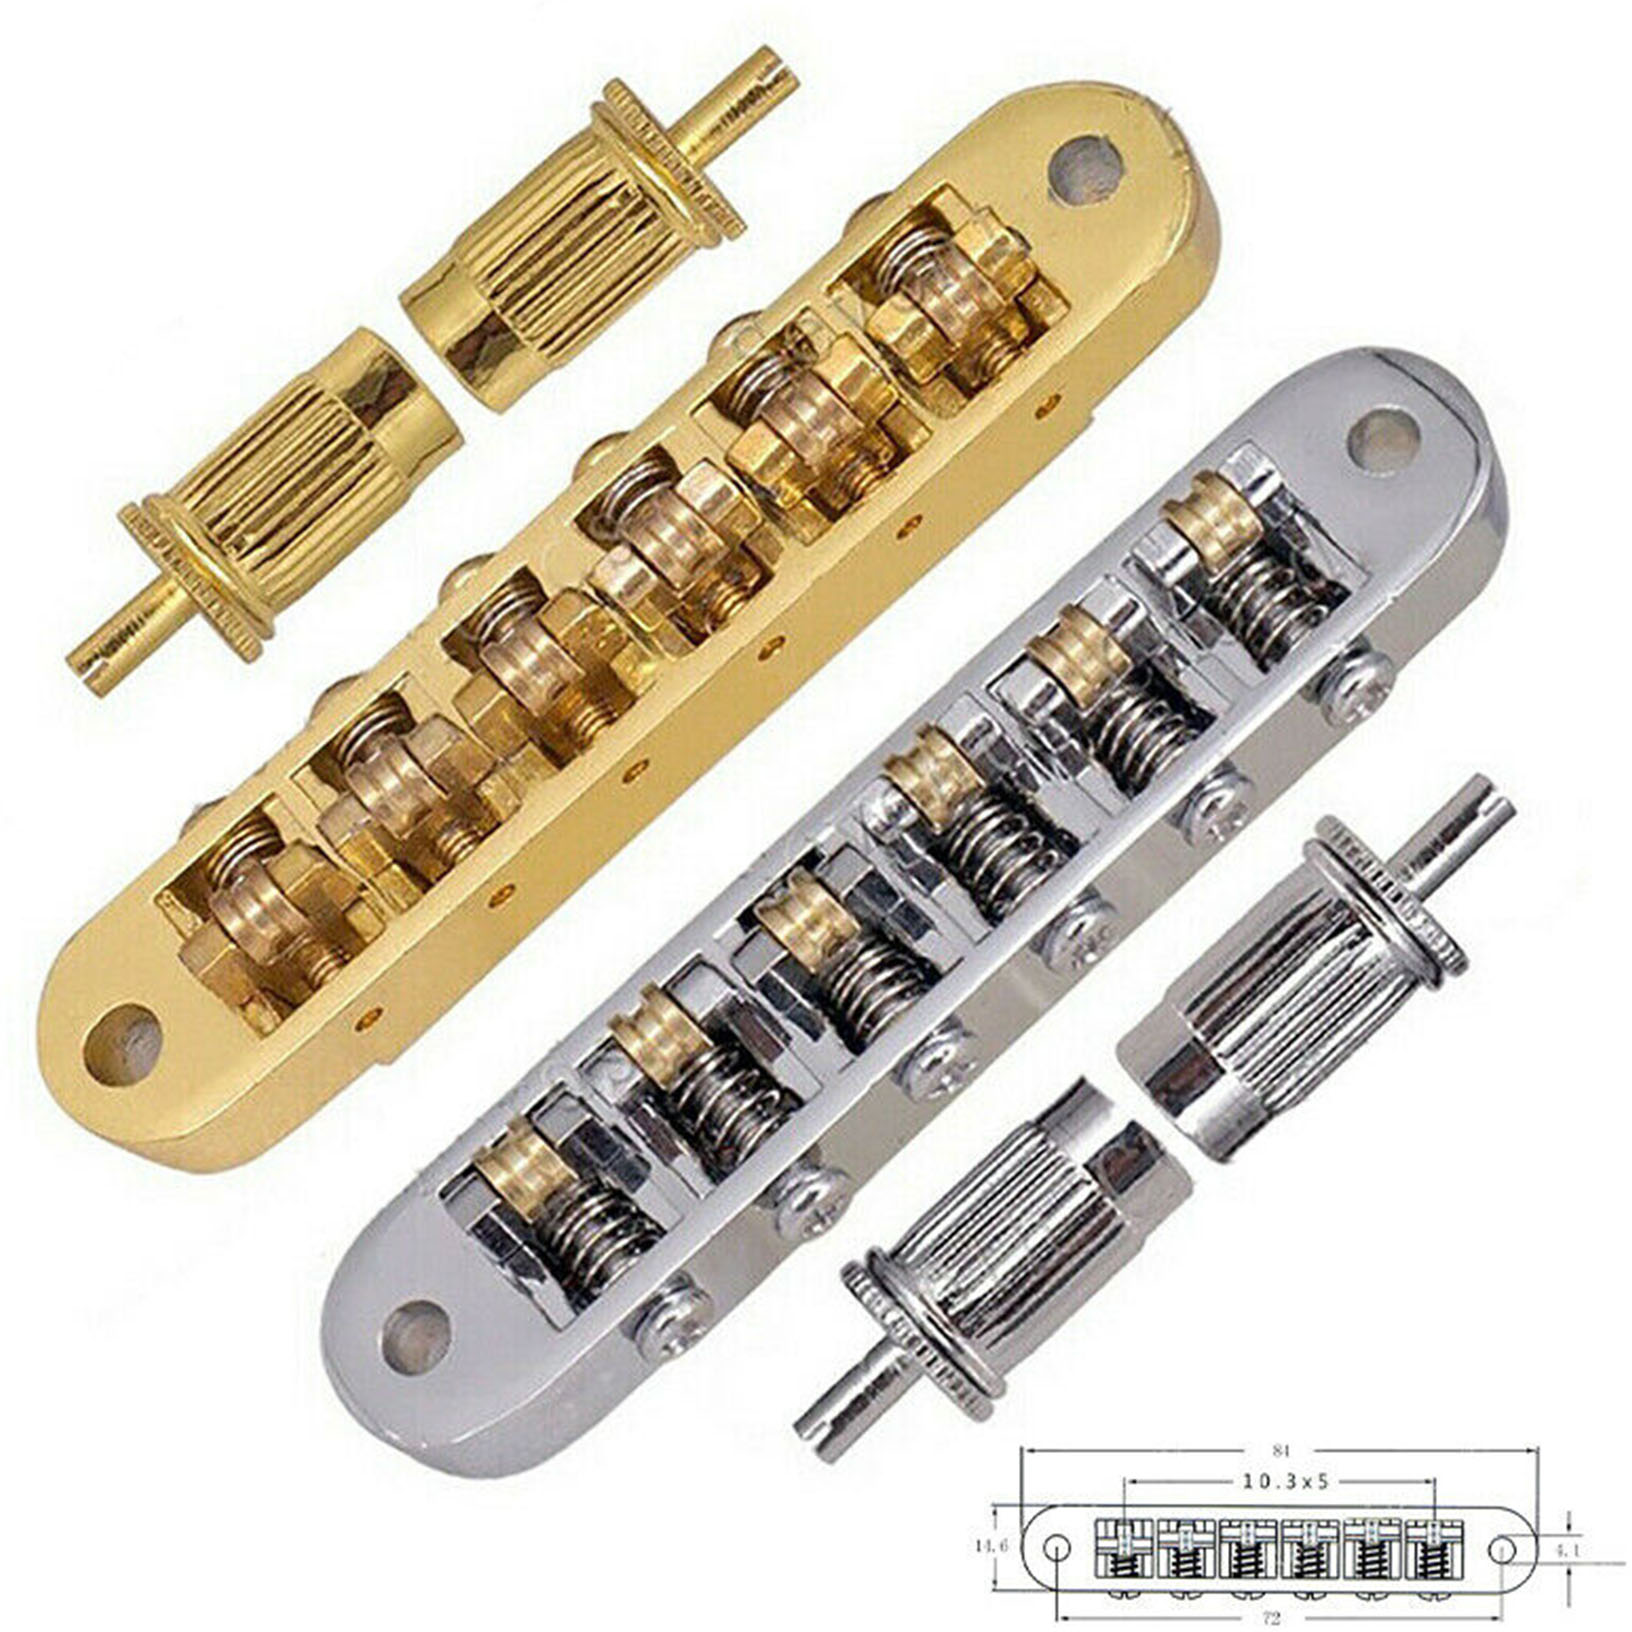 

Adjustable Roller Saddle Tune-O-Matic Bridge Tailpiece for Gibson LP Les Paul SG Electric Guitar Parts